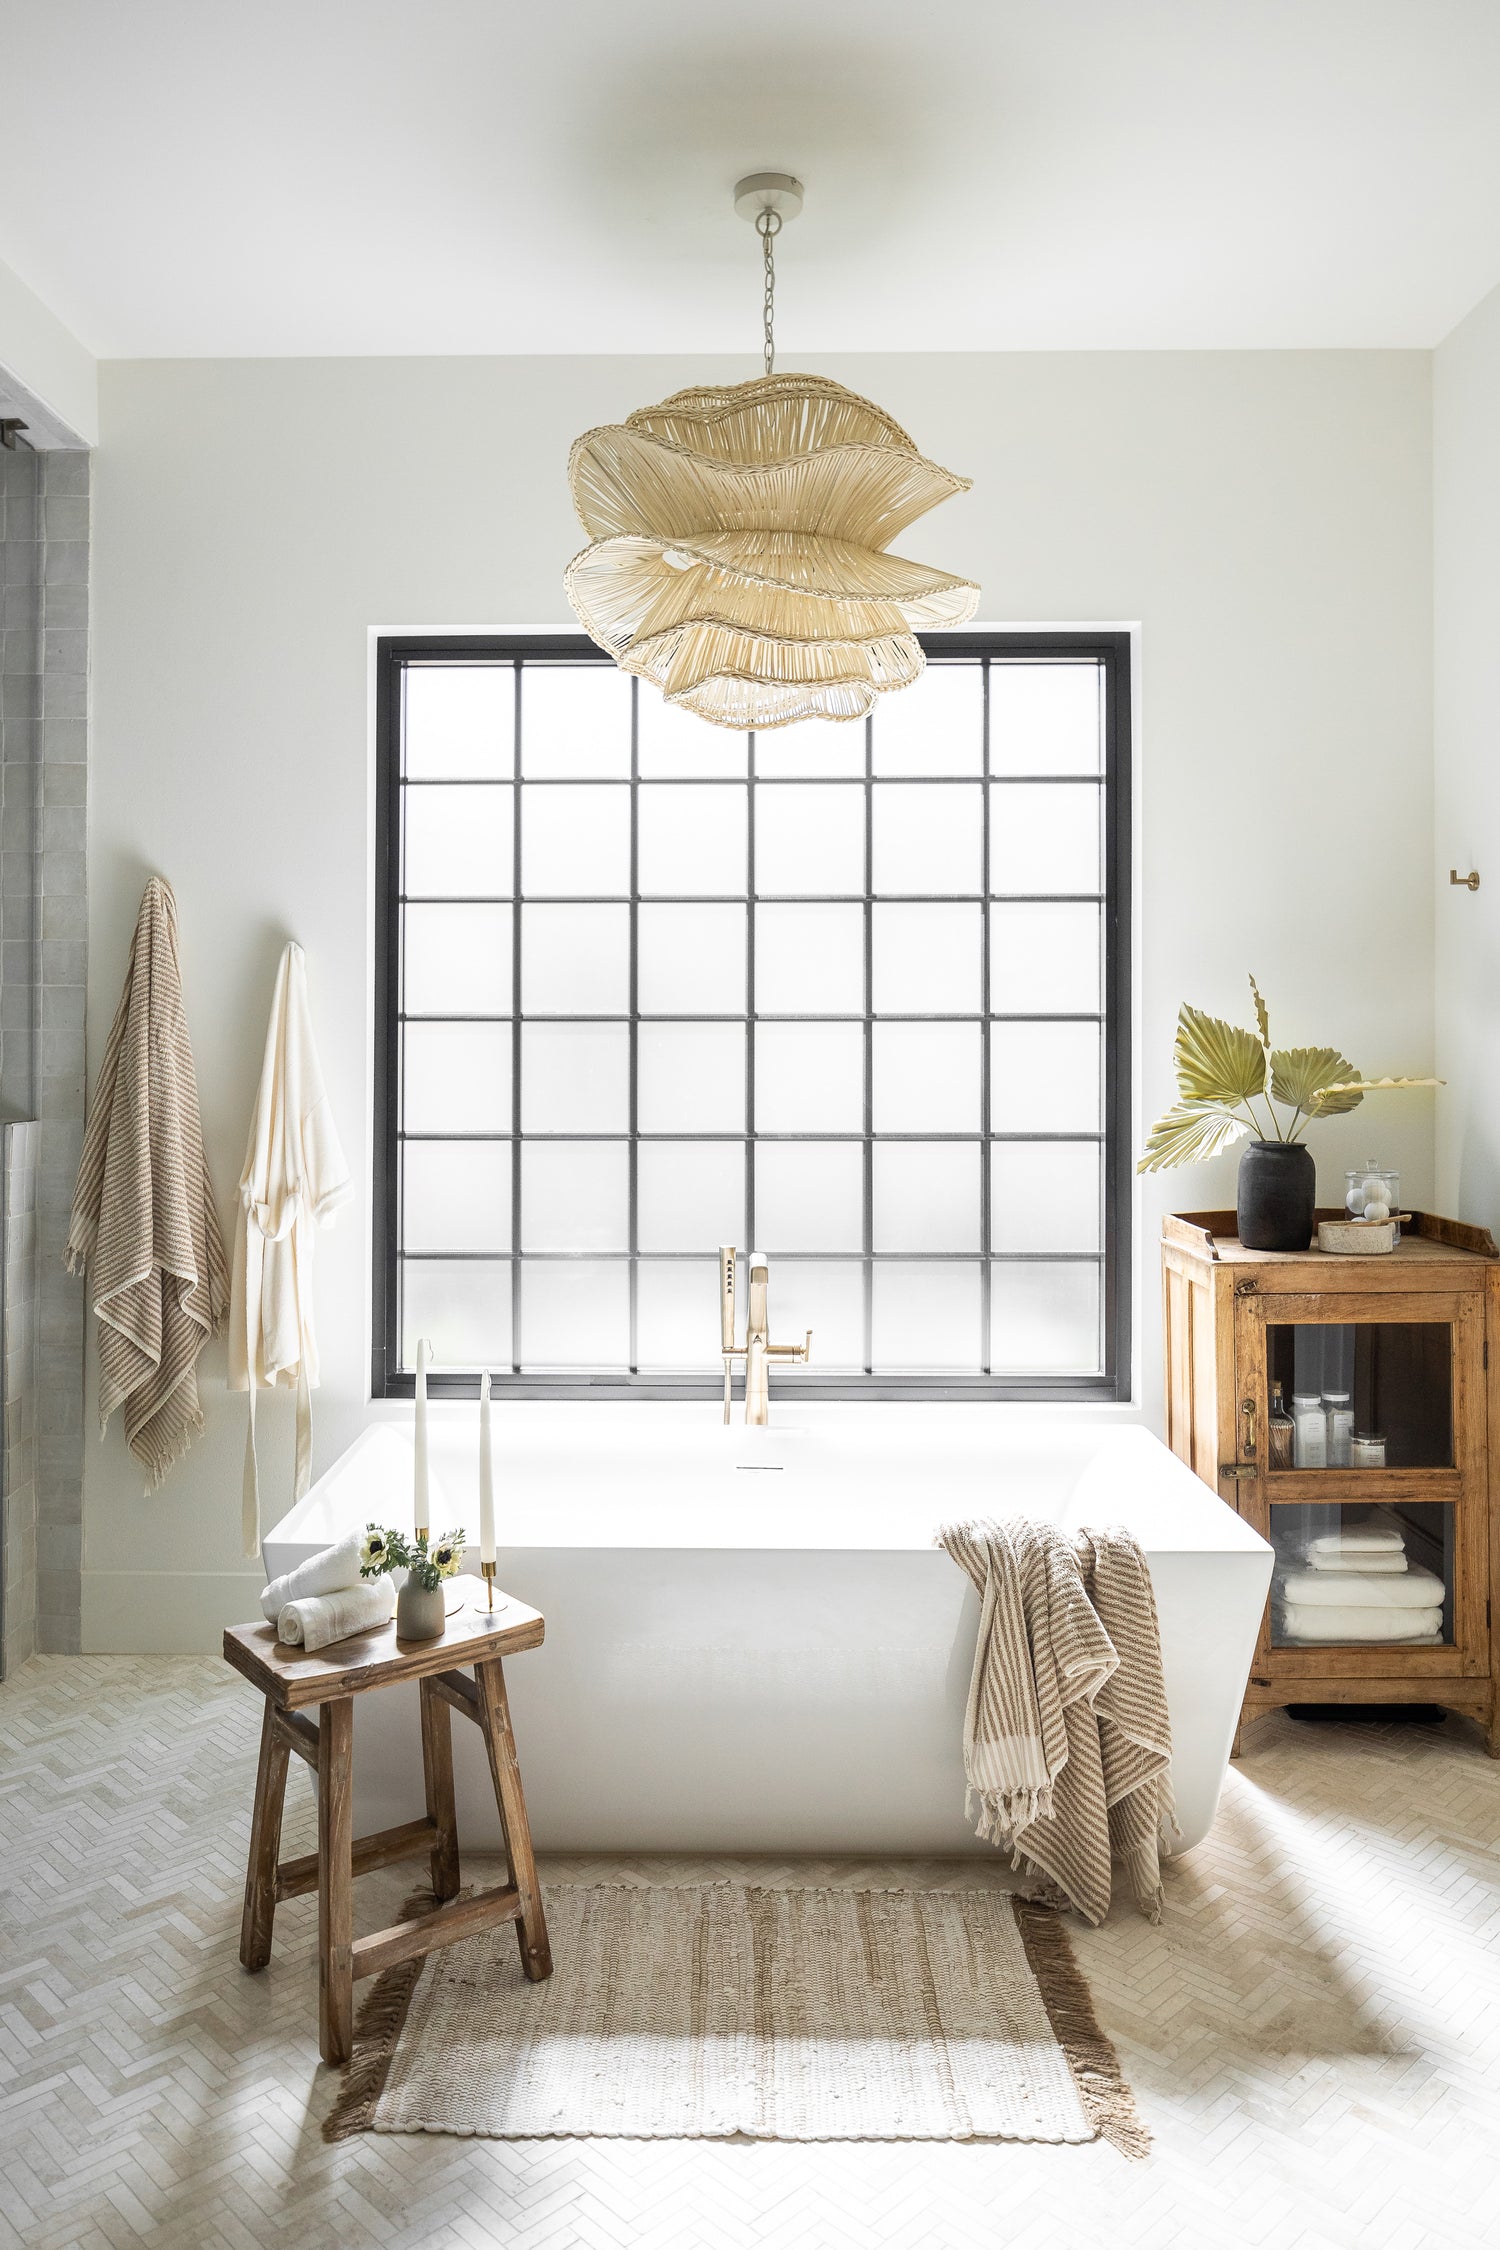 Free standing tub surrounded by decor with an organic shaped pendant light hanging above - View our lighting guide